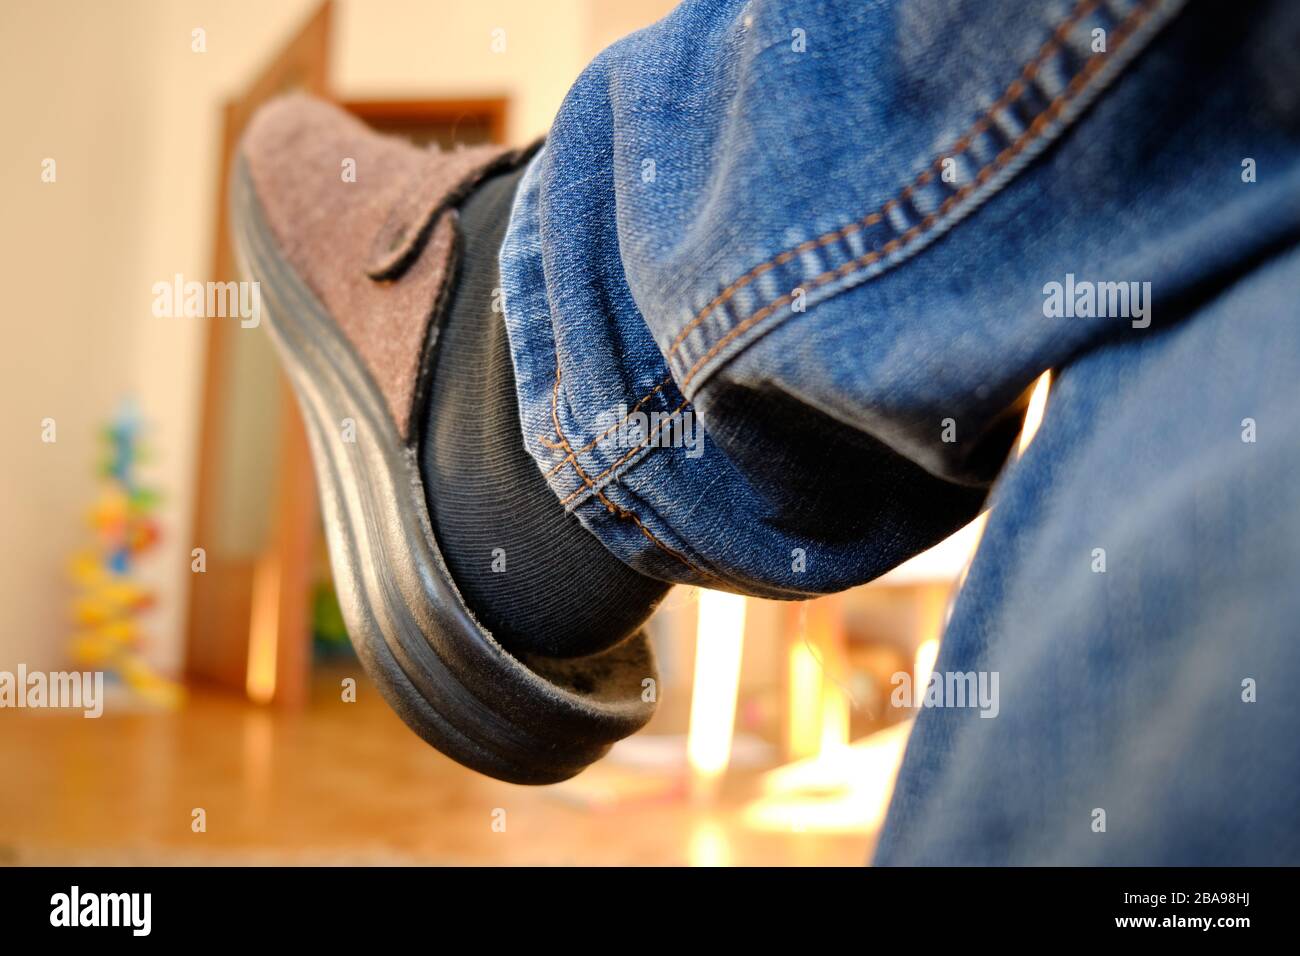 Closeup of right leg of a man wearing blue jeans and slippers while sitting bored inside the apartment on a sunny day during corona crisis. Seen in Ge Stock Photo